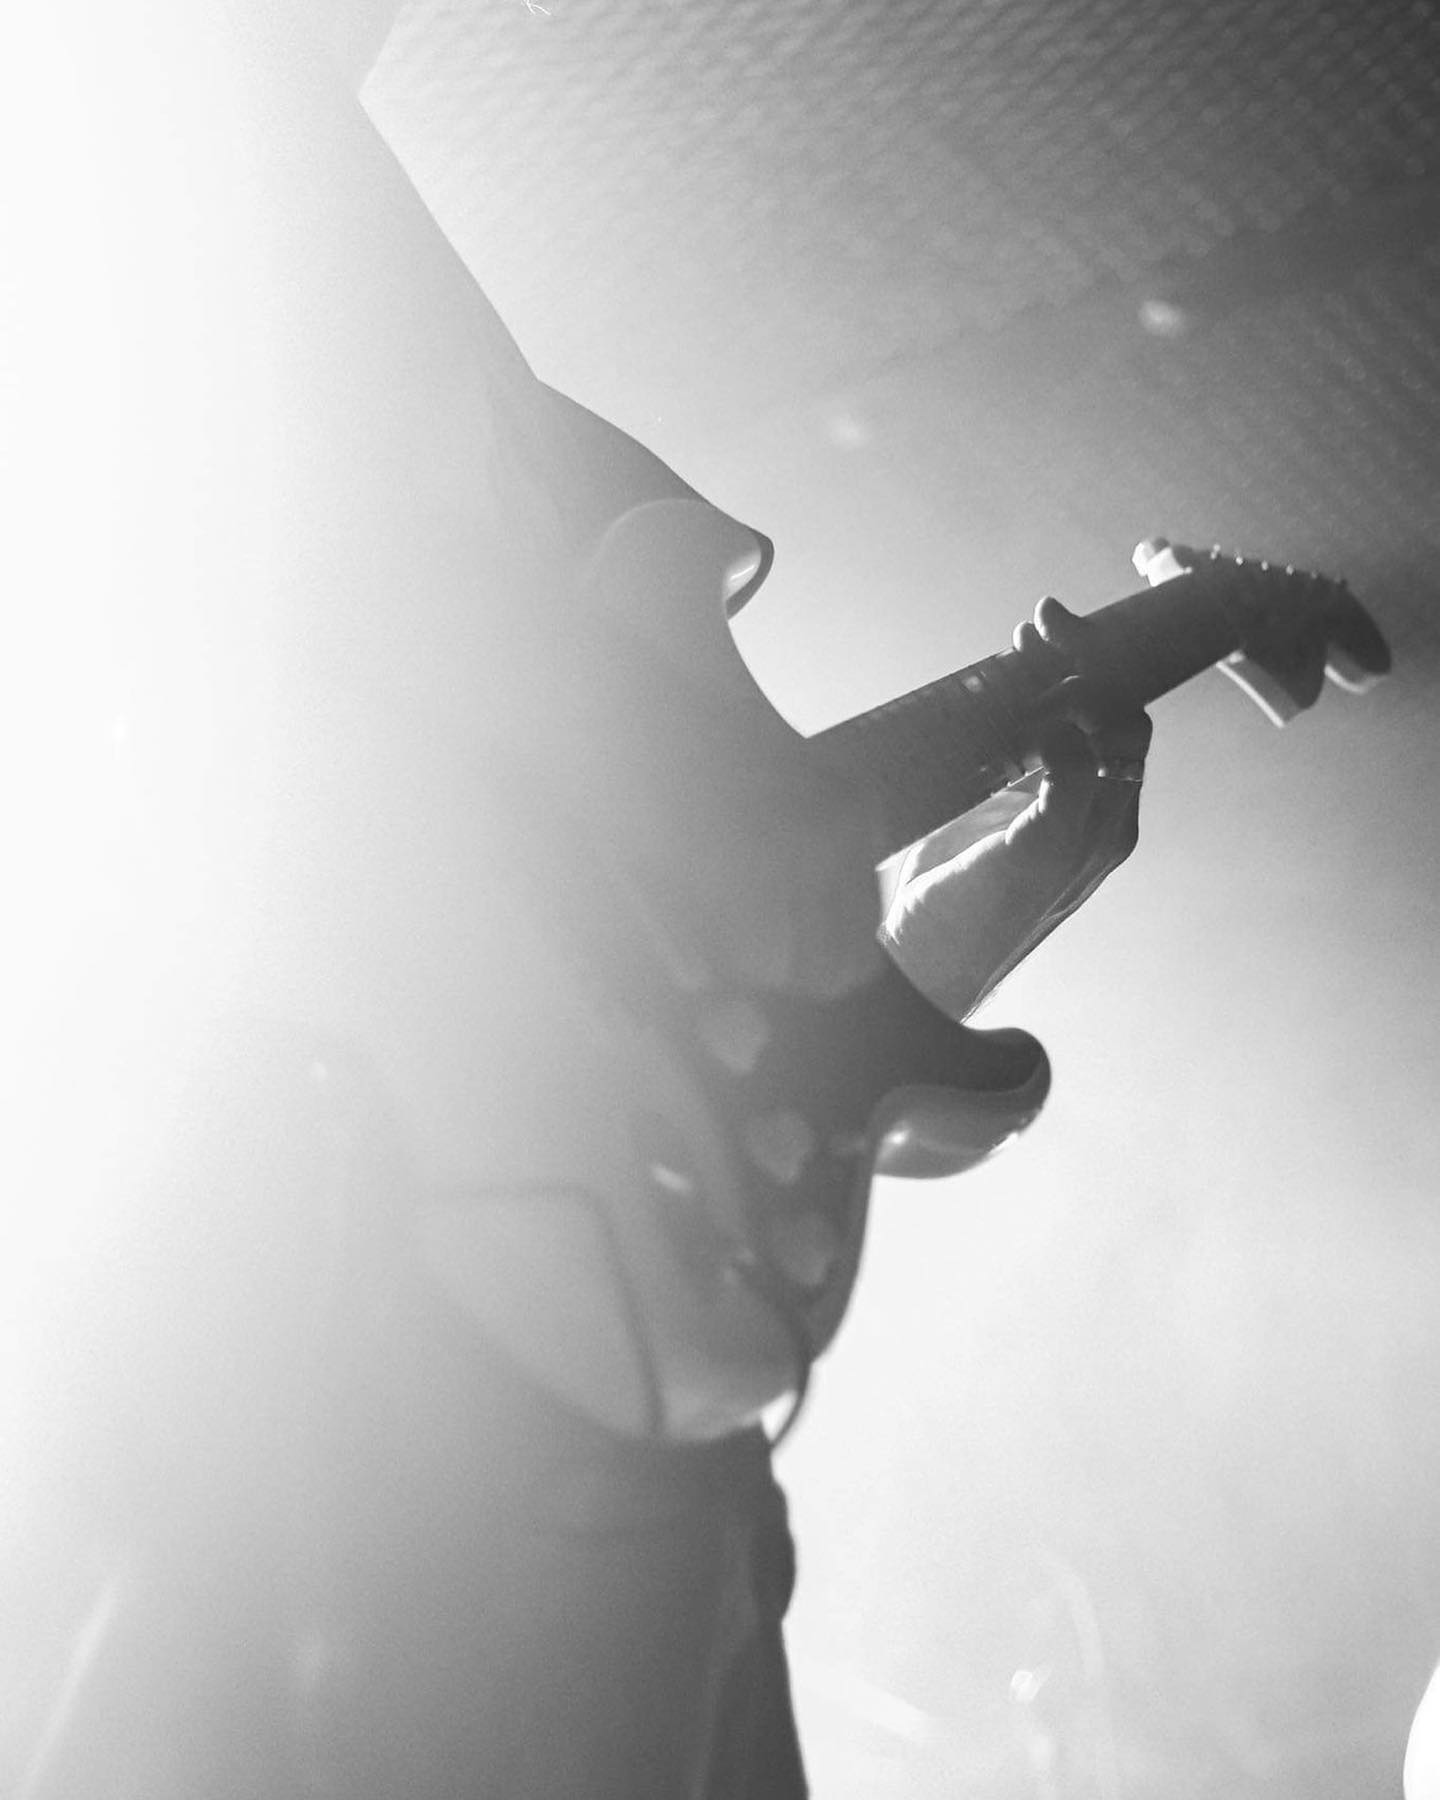 A black and white, misty image of Moe's stratocaster guitar being played live on stage